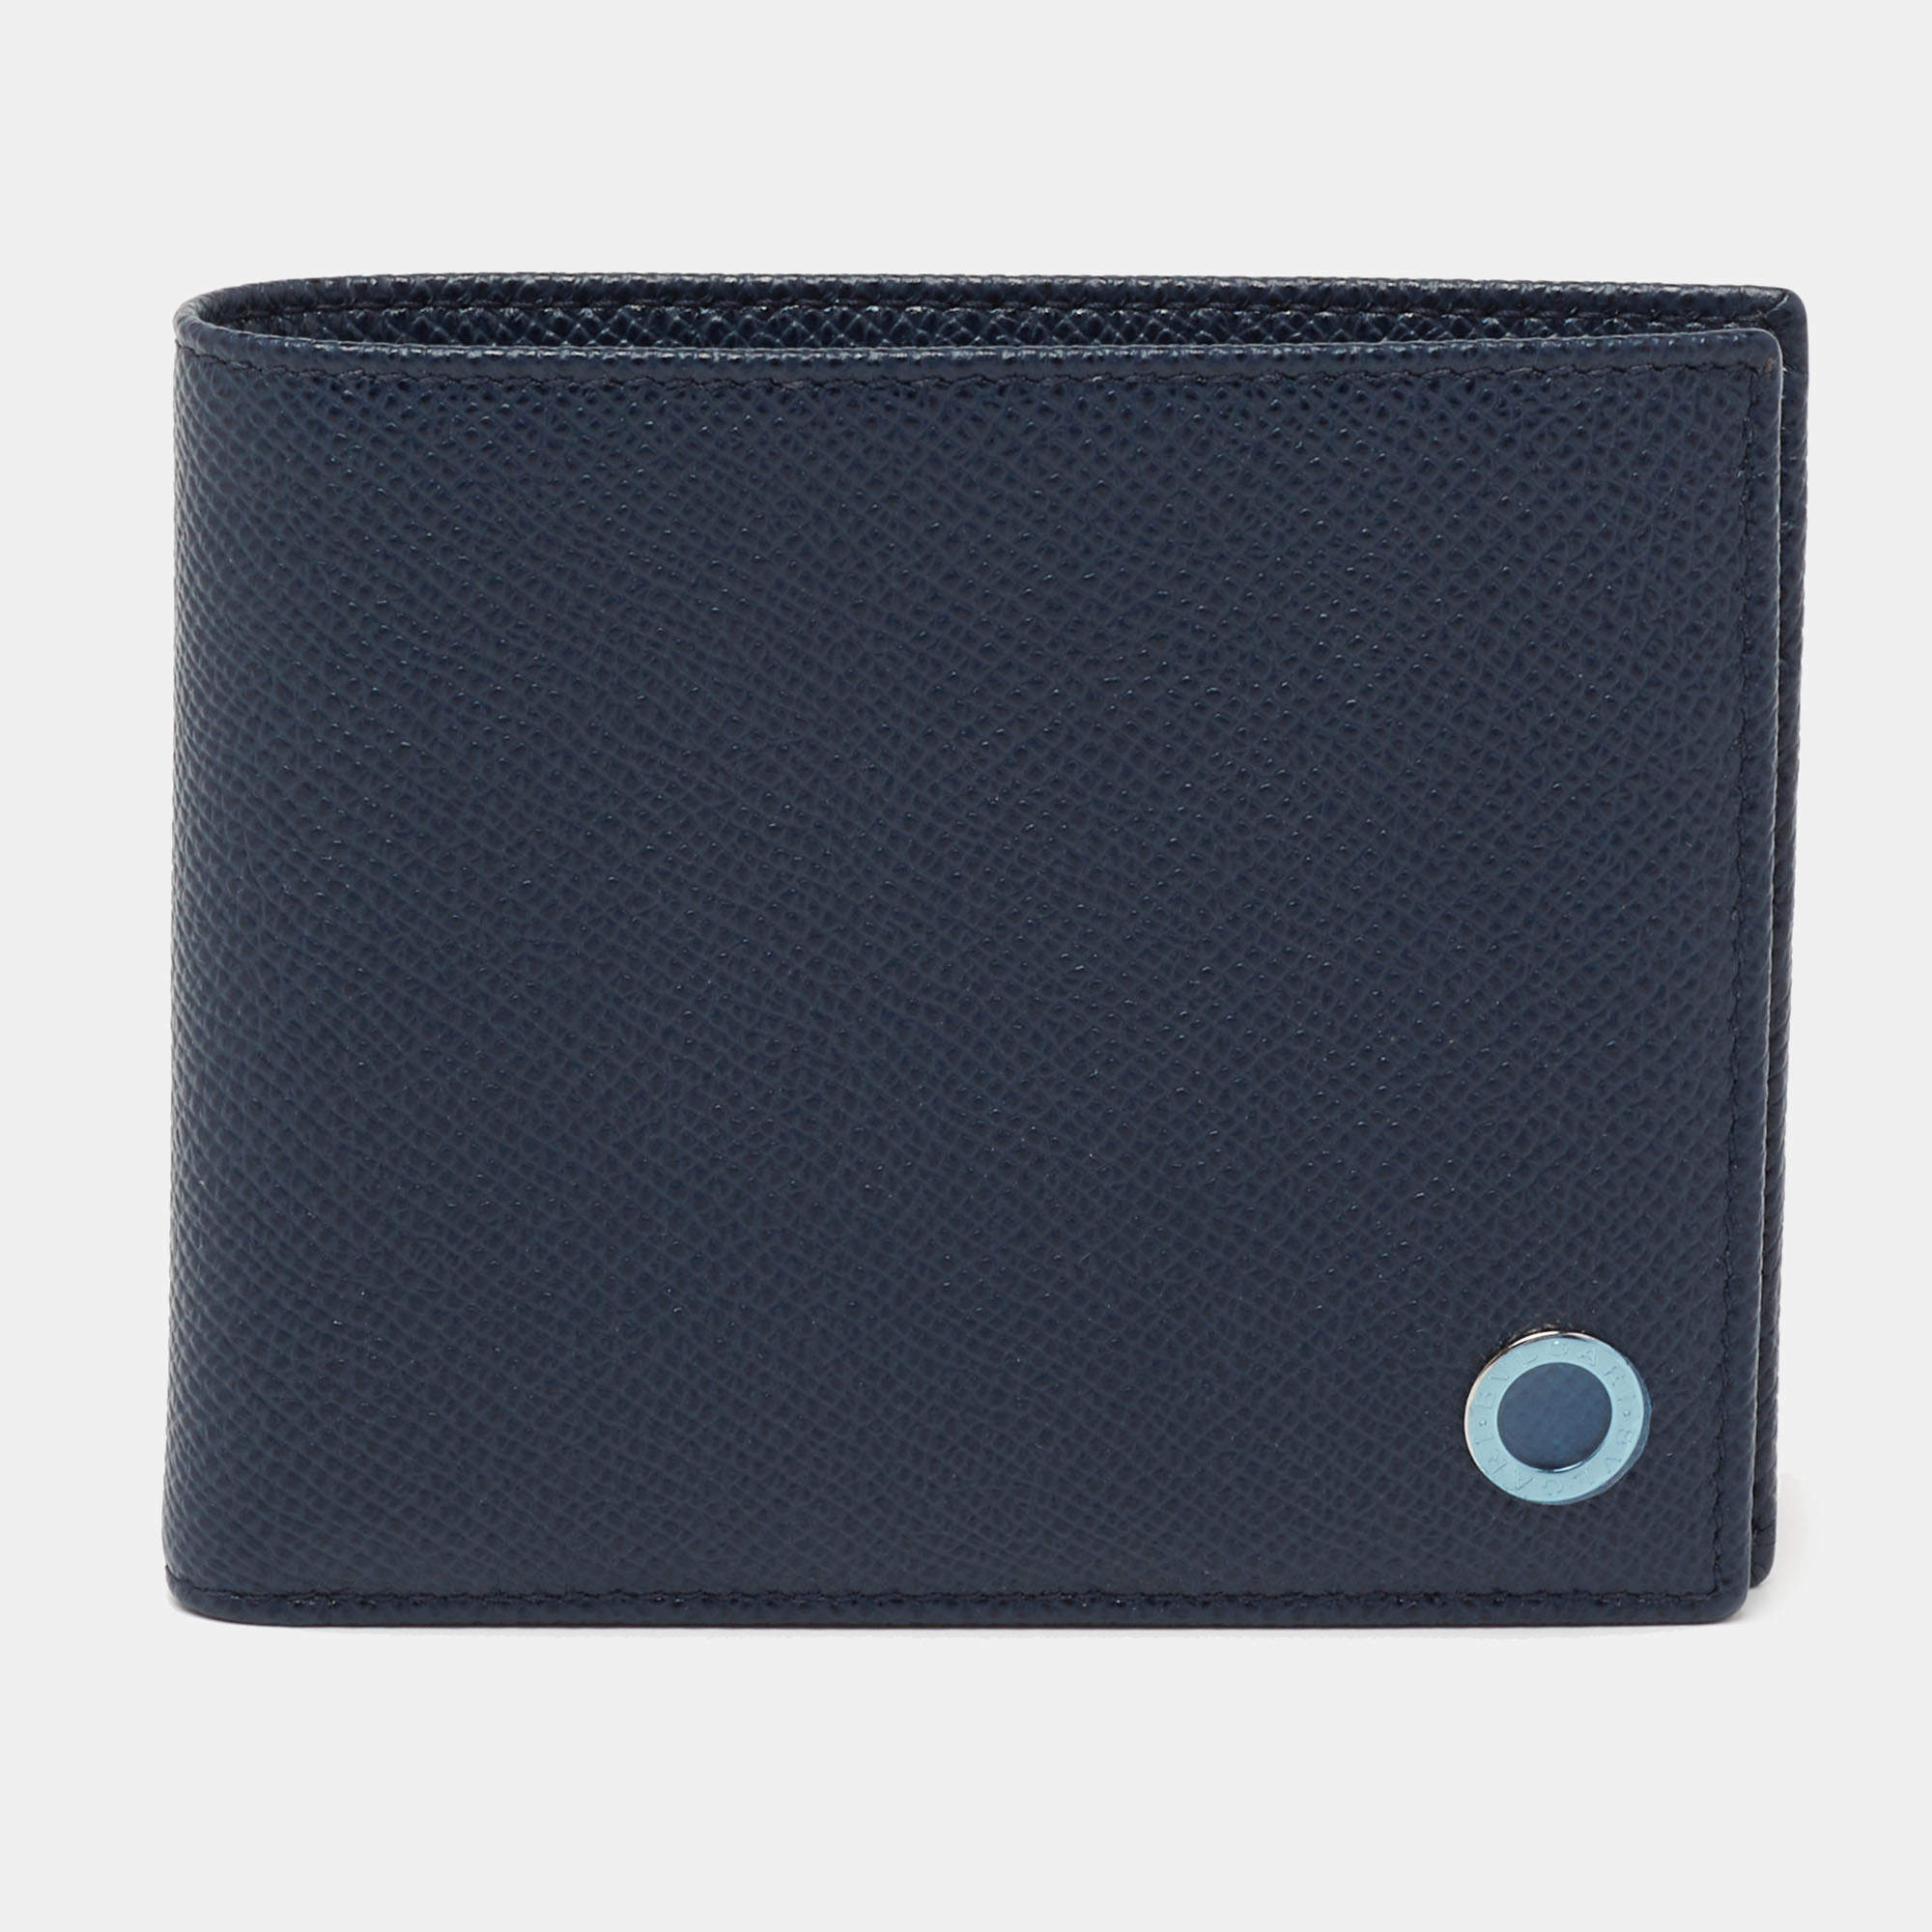 Bvlgari Navy Blue Grained Leather Bifold Compact Wallet